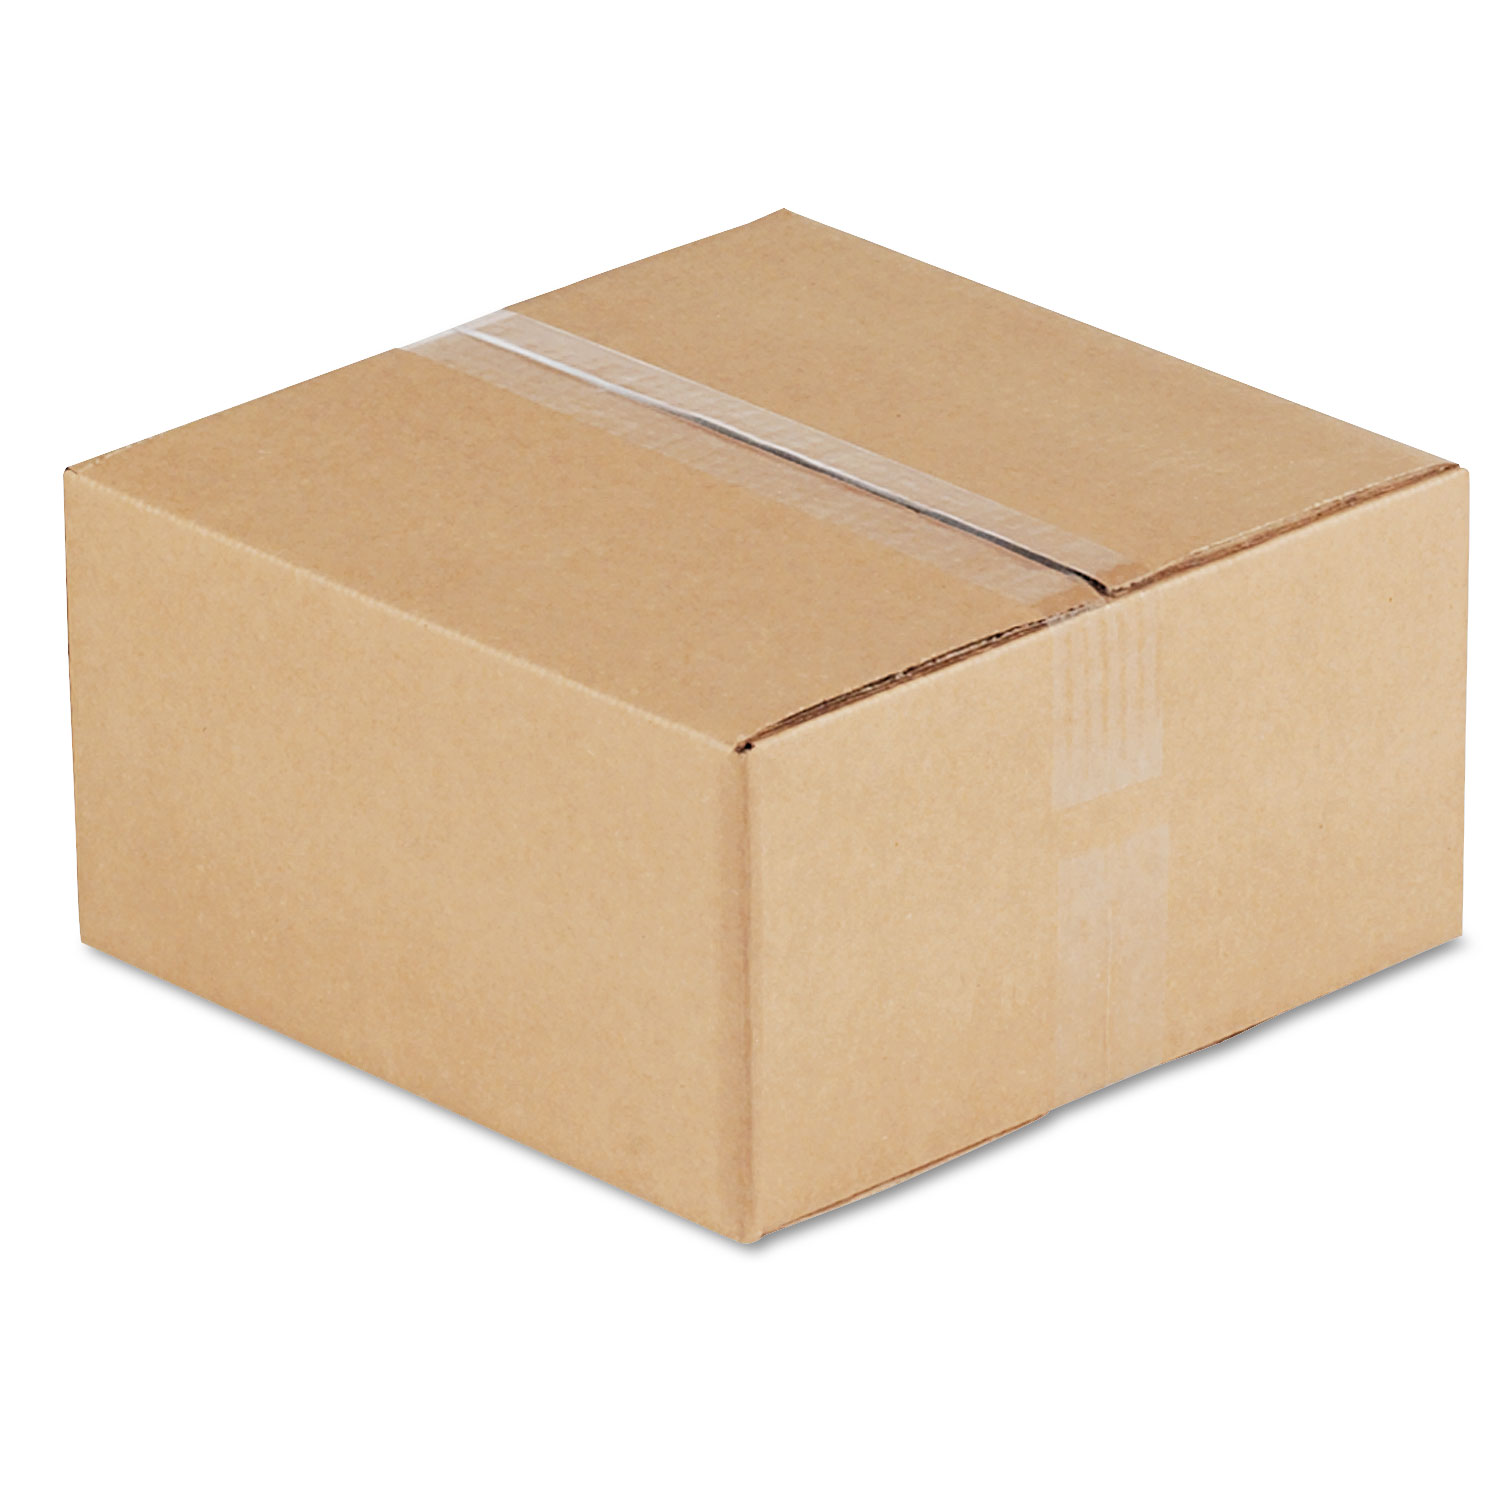 Fixed-Depth Shipping Boxes, Regular Slotted Container (RSC), 12